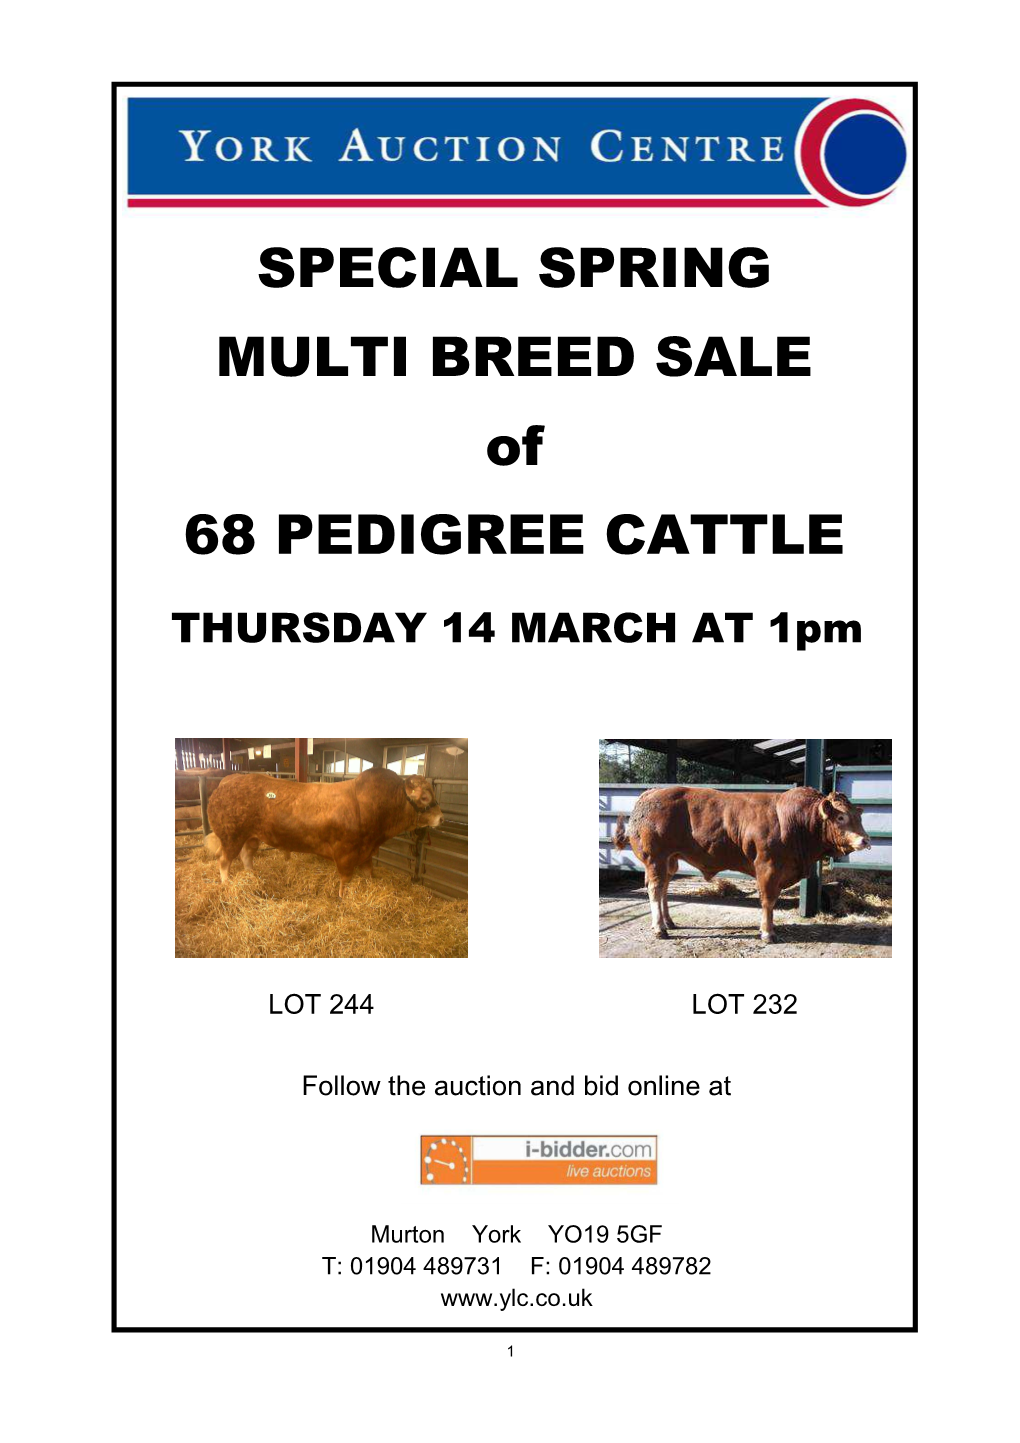 SPECIAL SPRING MULTI BREED SALE of 68 PEDIGREE CATTLE